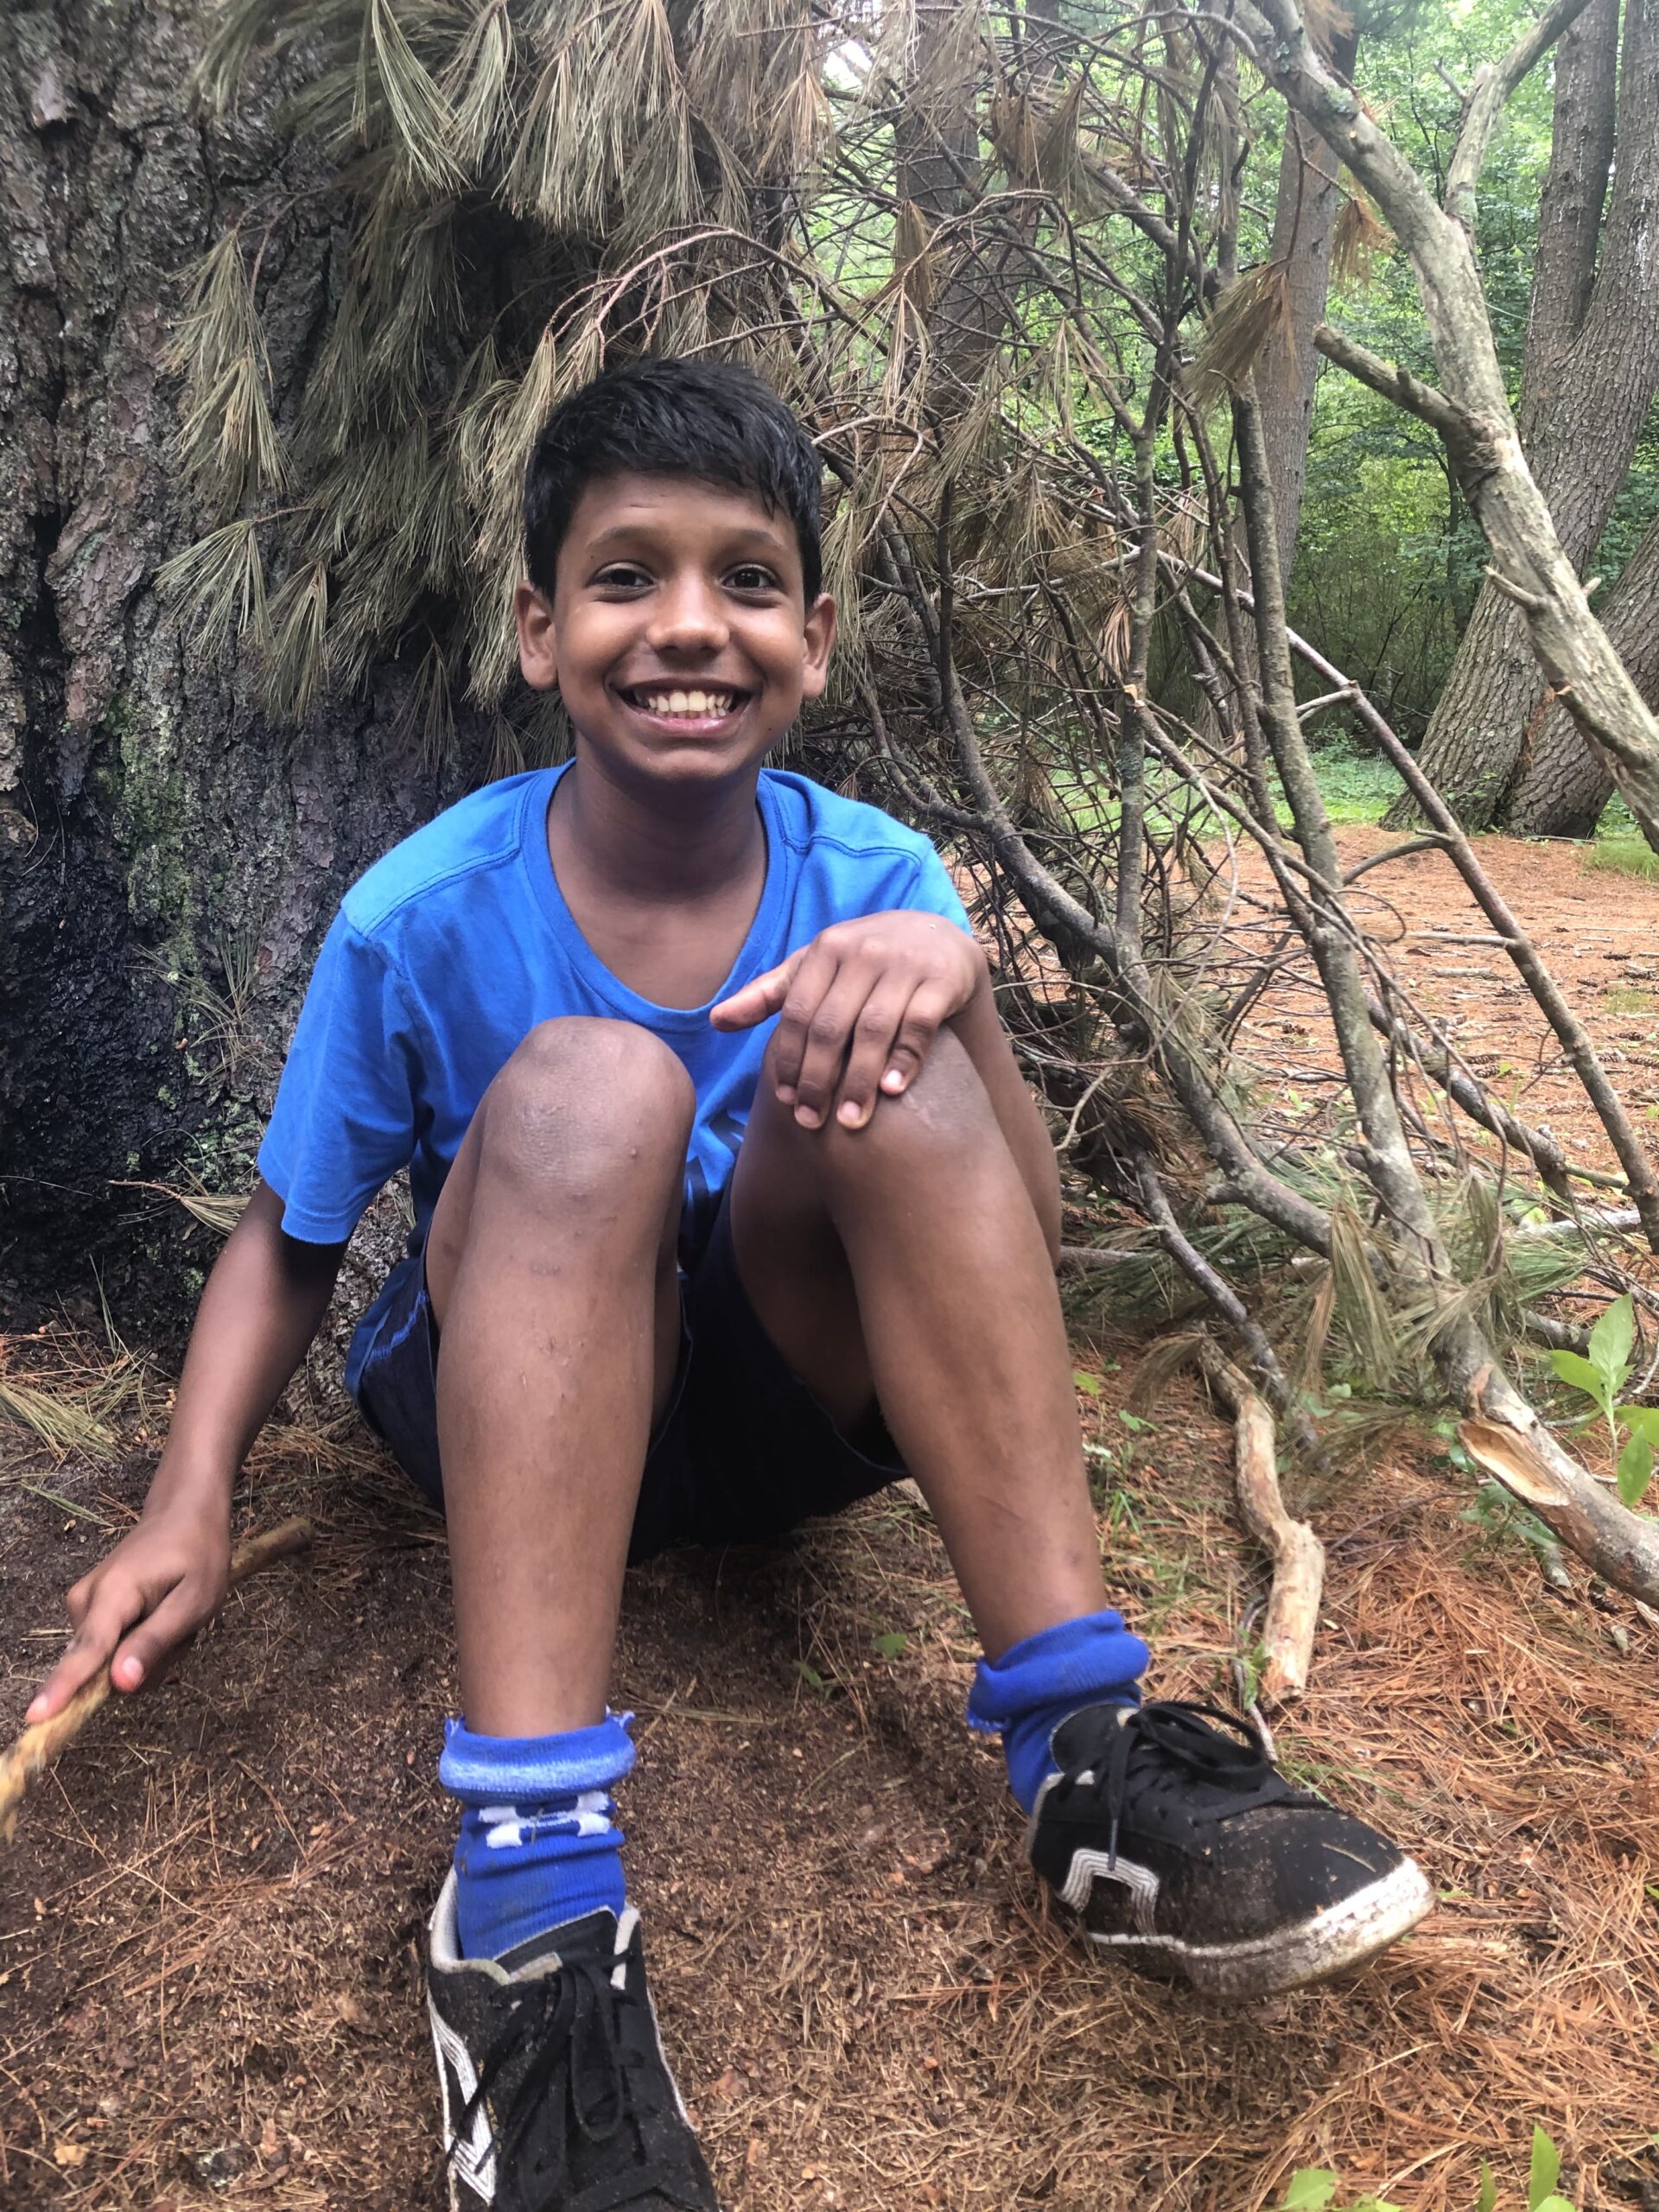 A smiling boy sitting on the ground beneath a tree wearing a blue shirt and hiking shoes